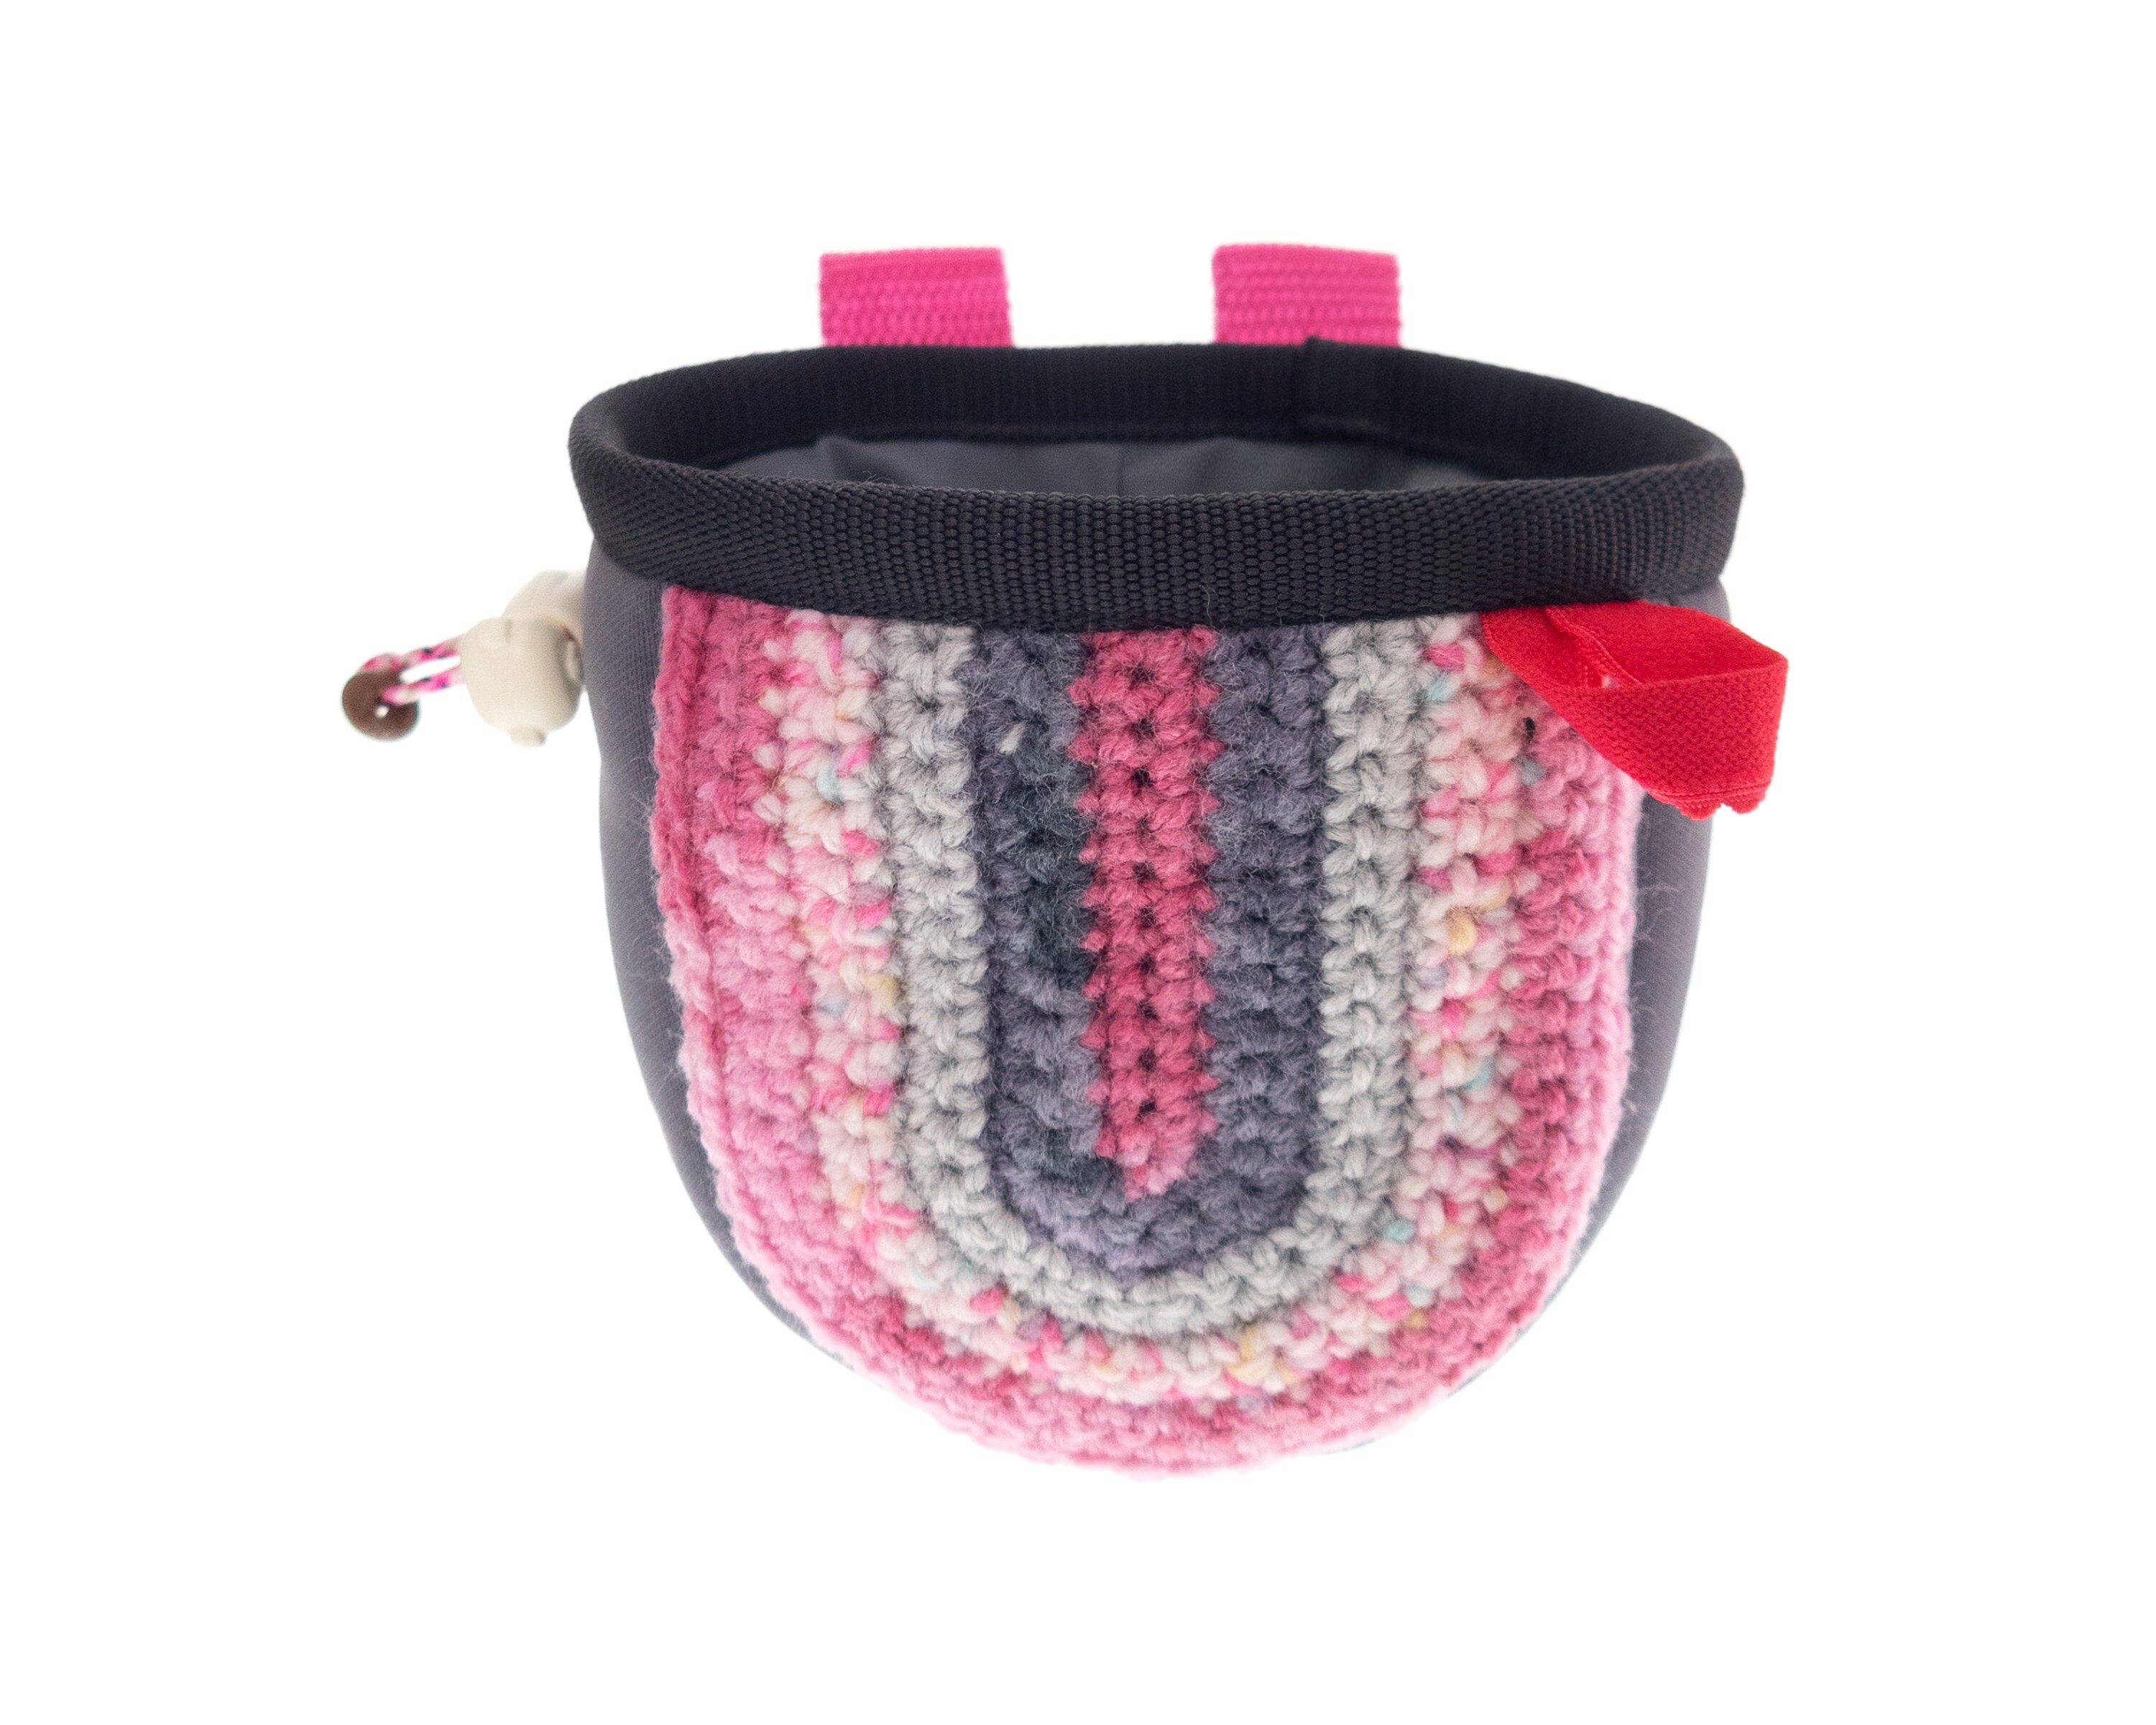 Two Loops Bouldering Chalk Bag Climbing Gear for Indoor and Traditional  Rock Climbing. Bouldering Bucket of Neoprene, Crochet. M Size